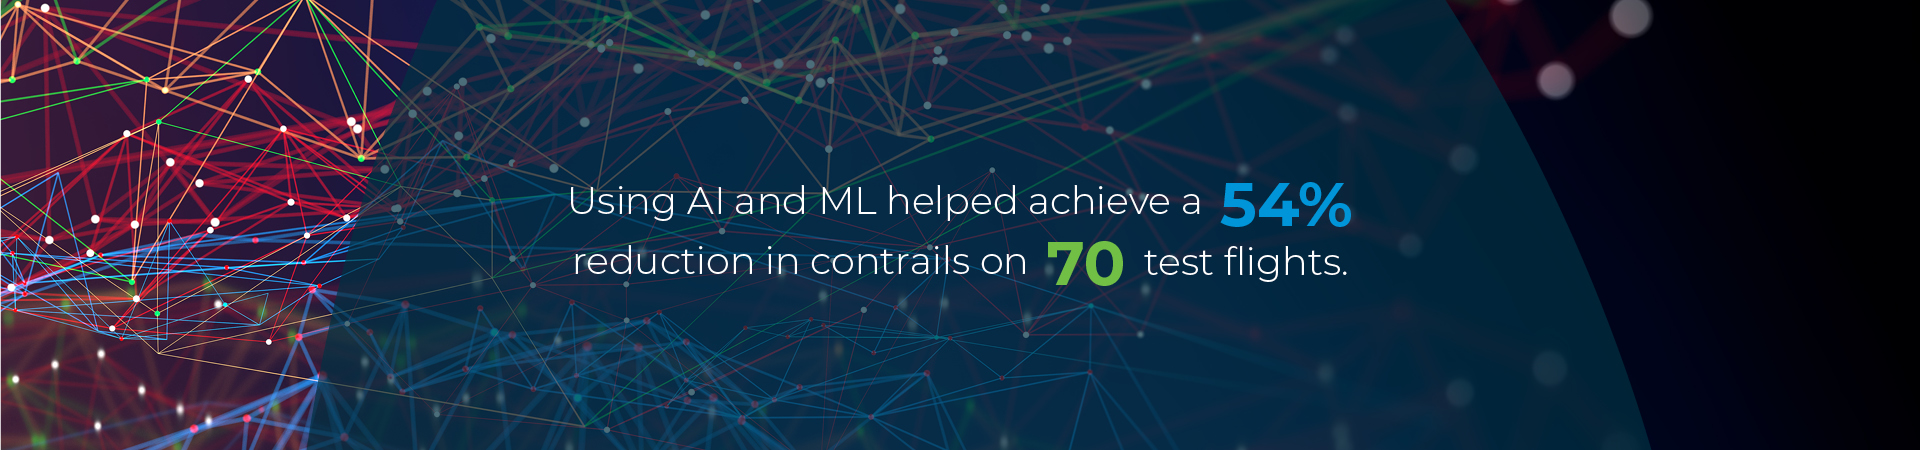 AI corporate travel - Using AI and ML helped archive a 54% reduction in contrails on 70 test flights